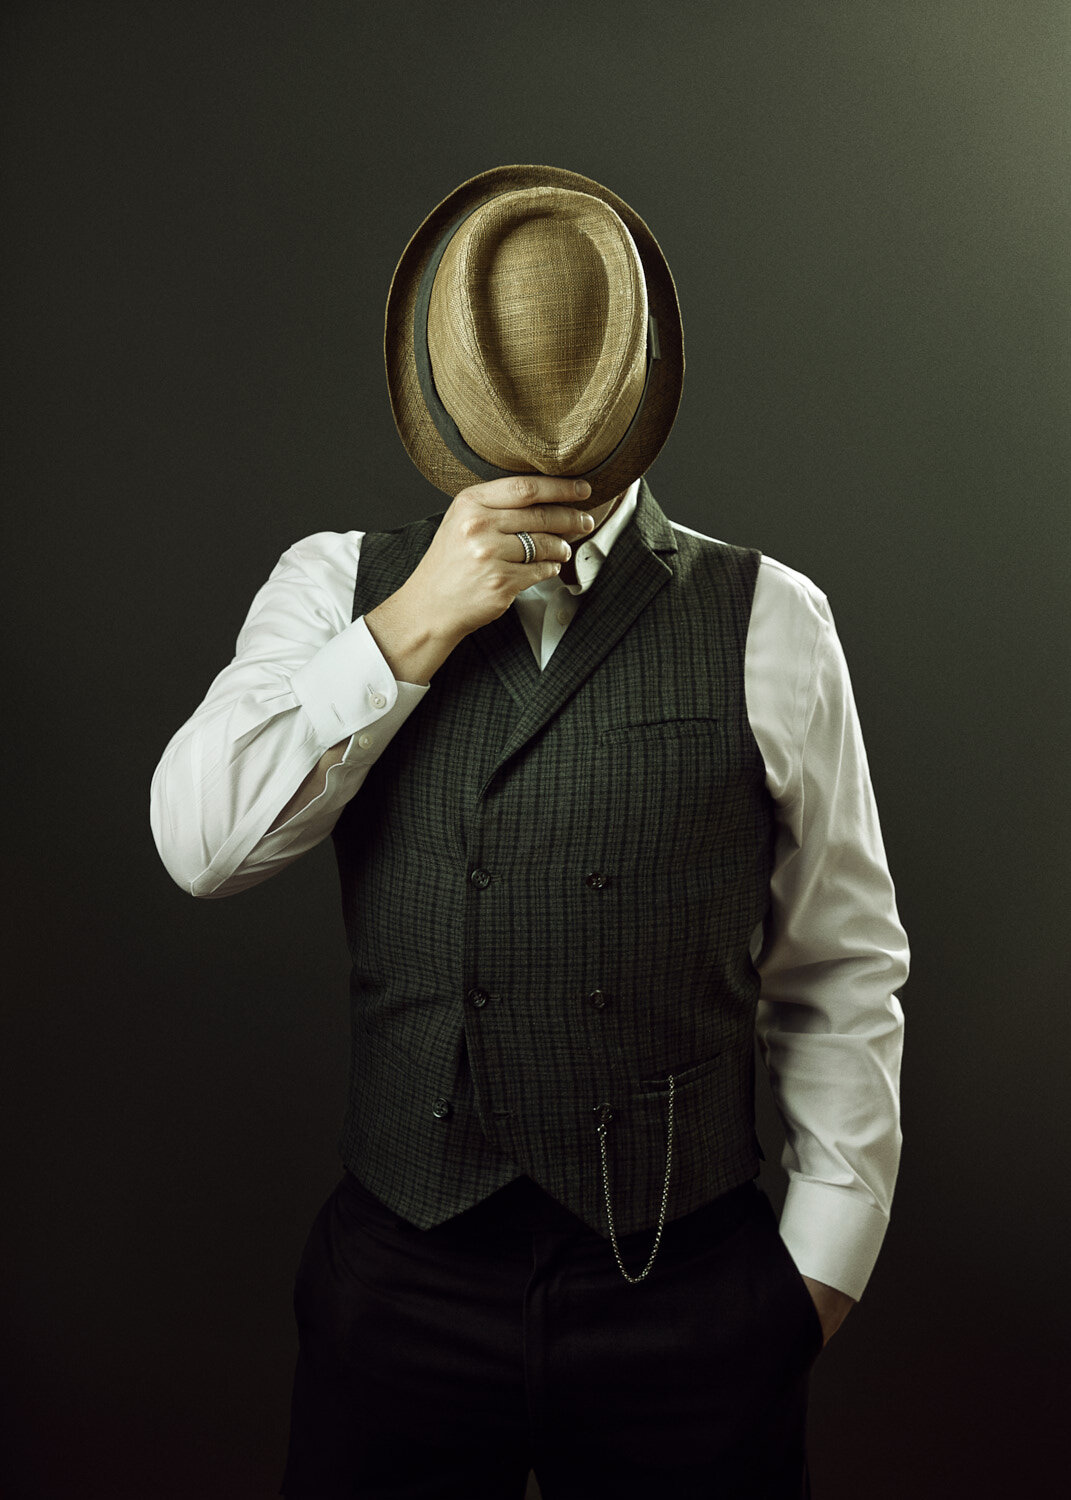 surreal studio portrait of musician in vintage outfit with hat covering his face